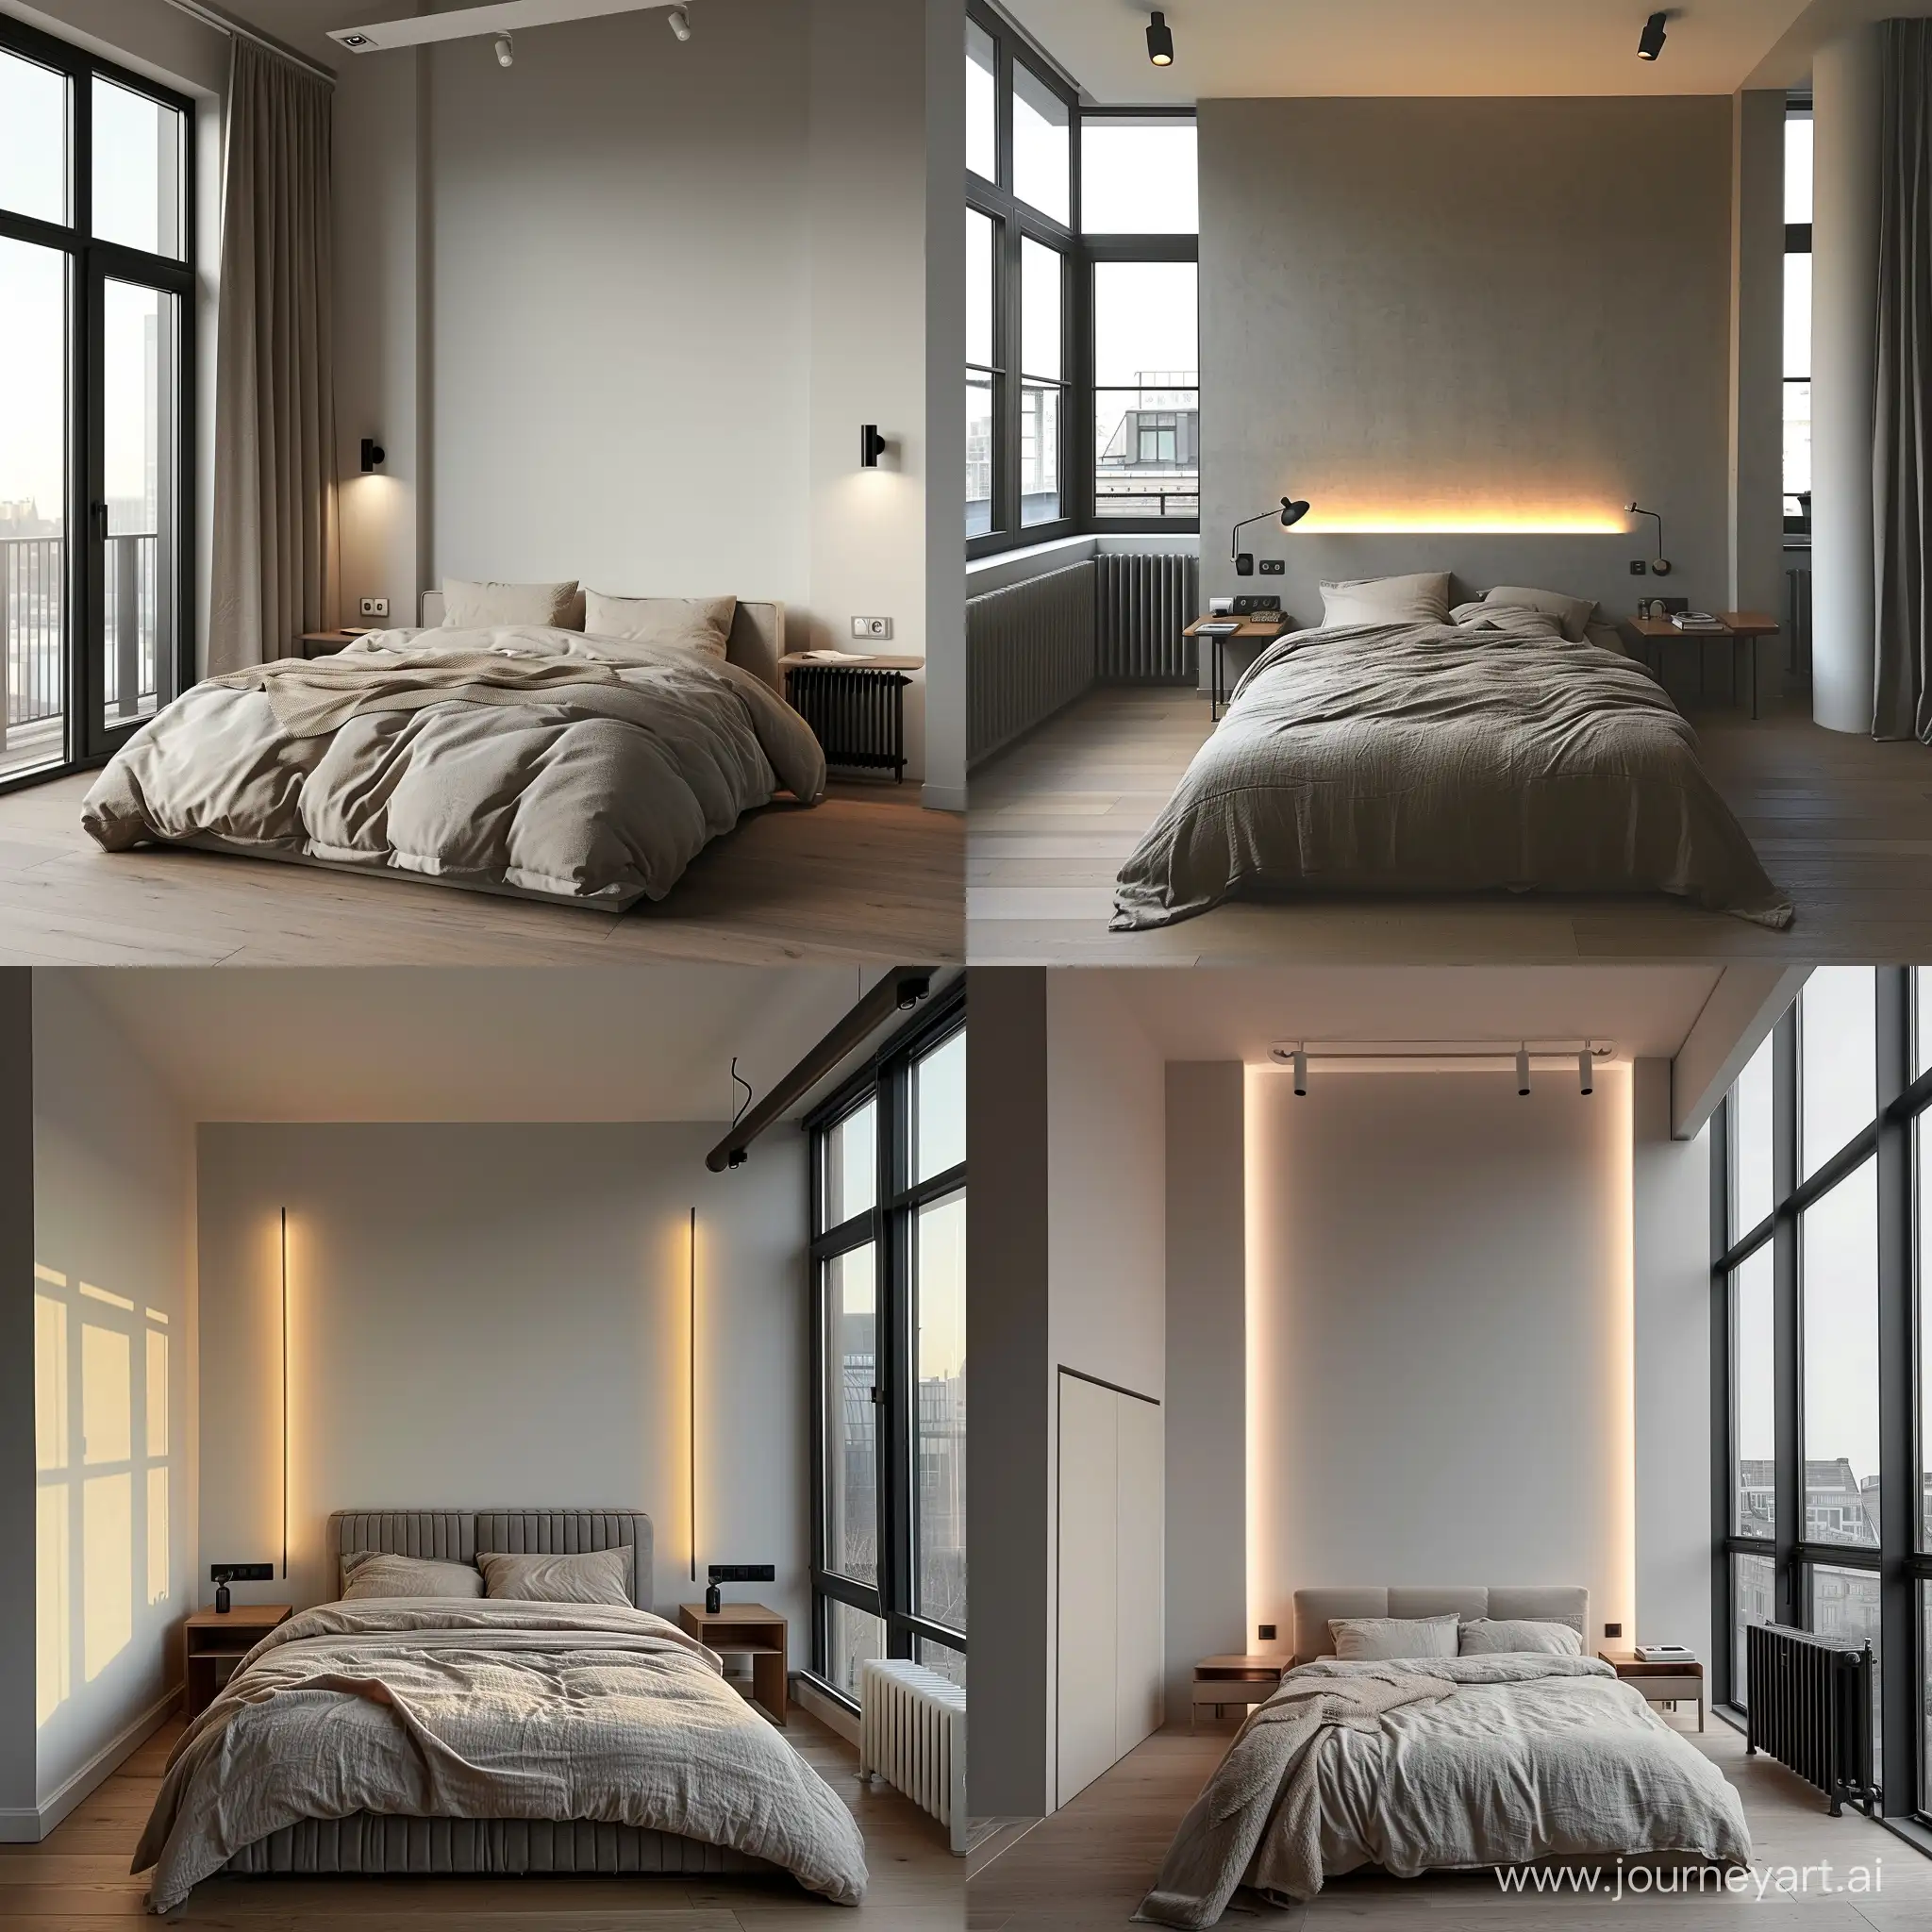 Minimalist-Bedroom-with-Soft-Bed-and-FloortoCeiling-Windows